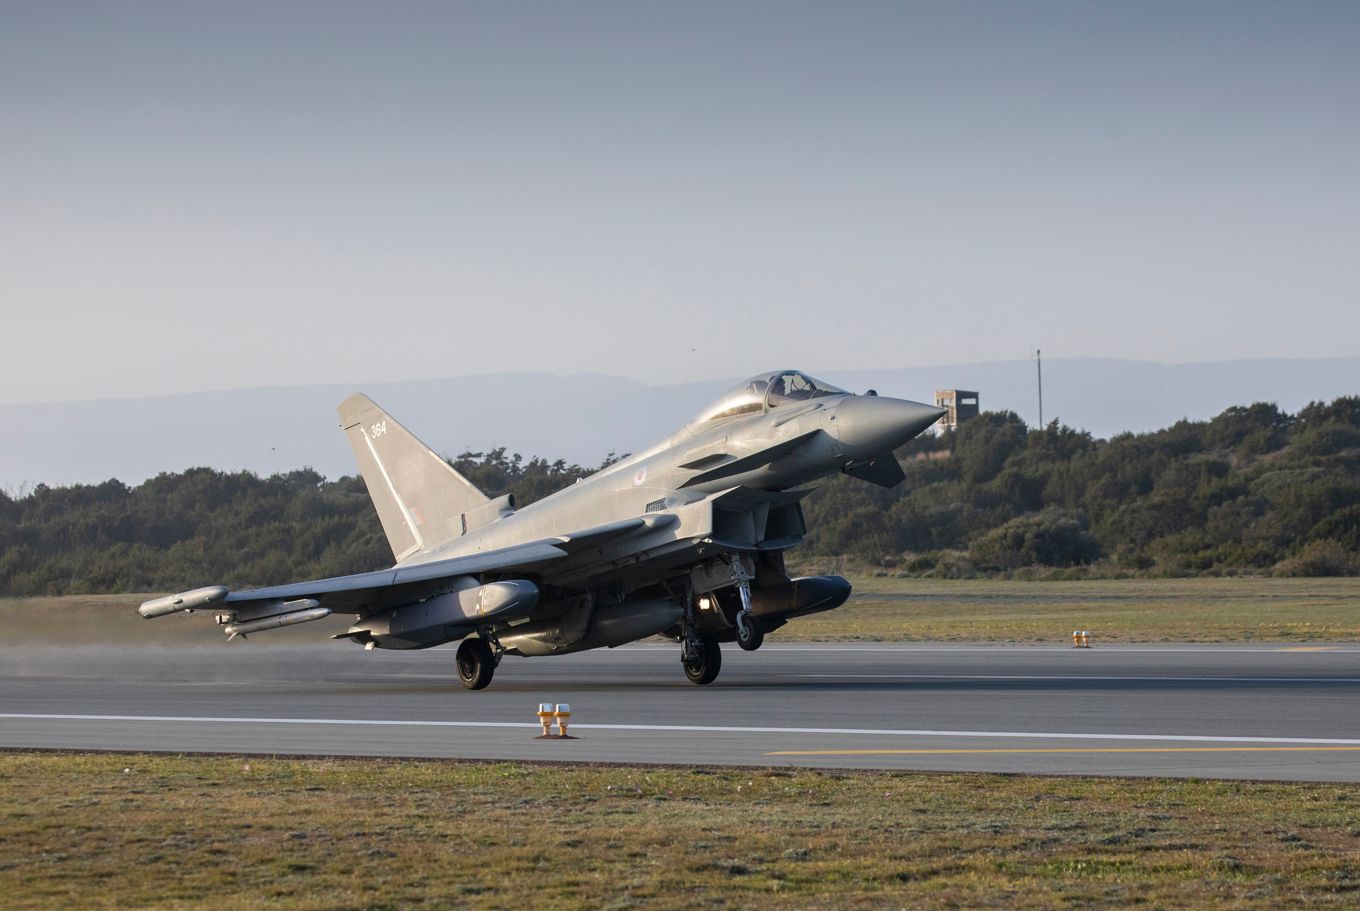 Image shows an RAF typhoon aircraft about to take off.